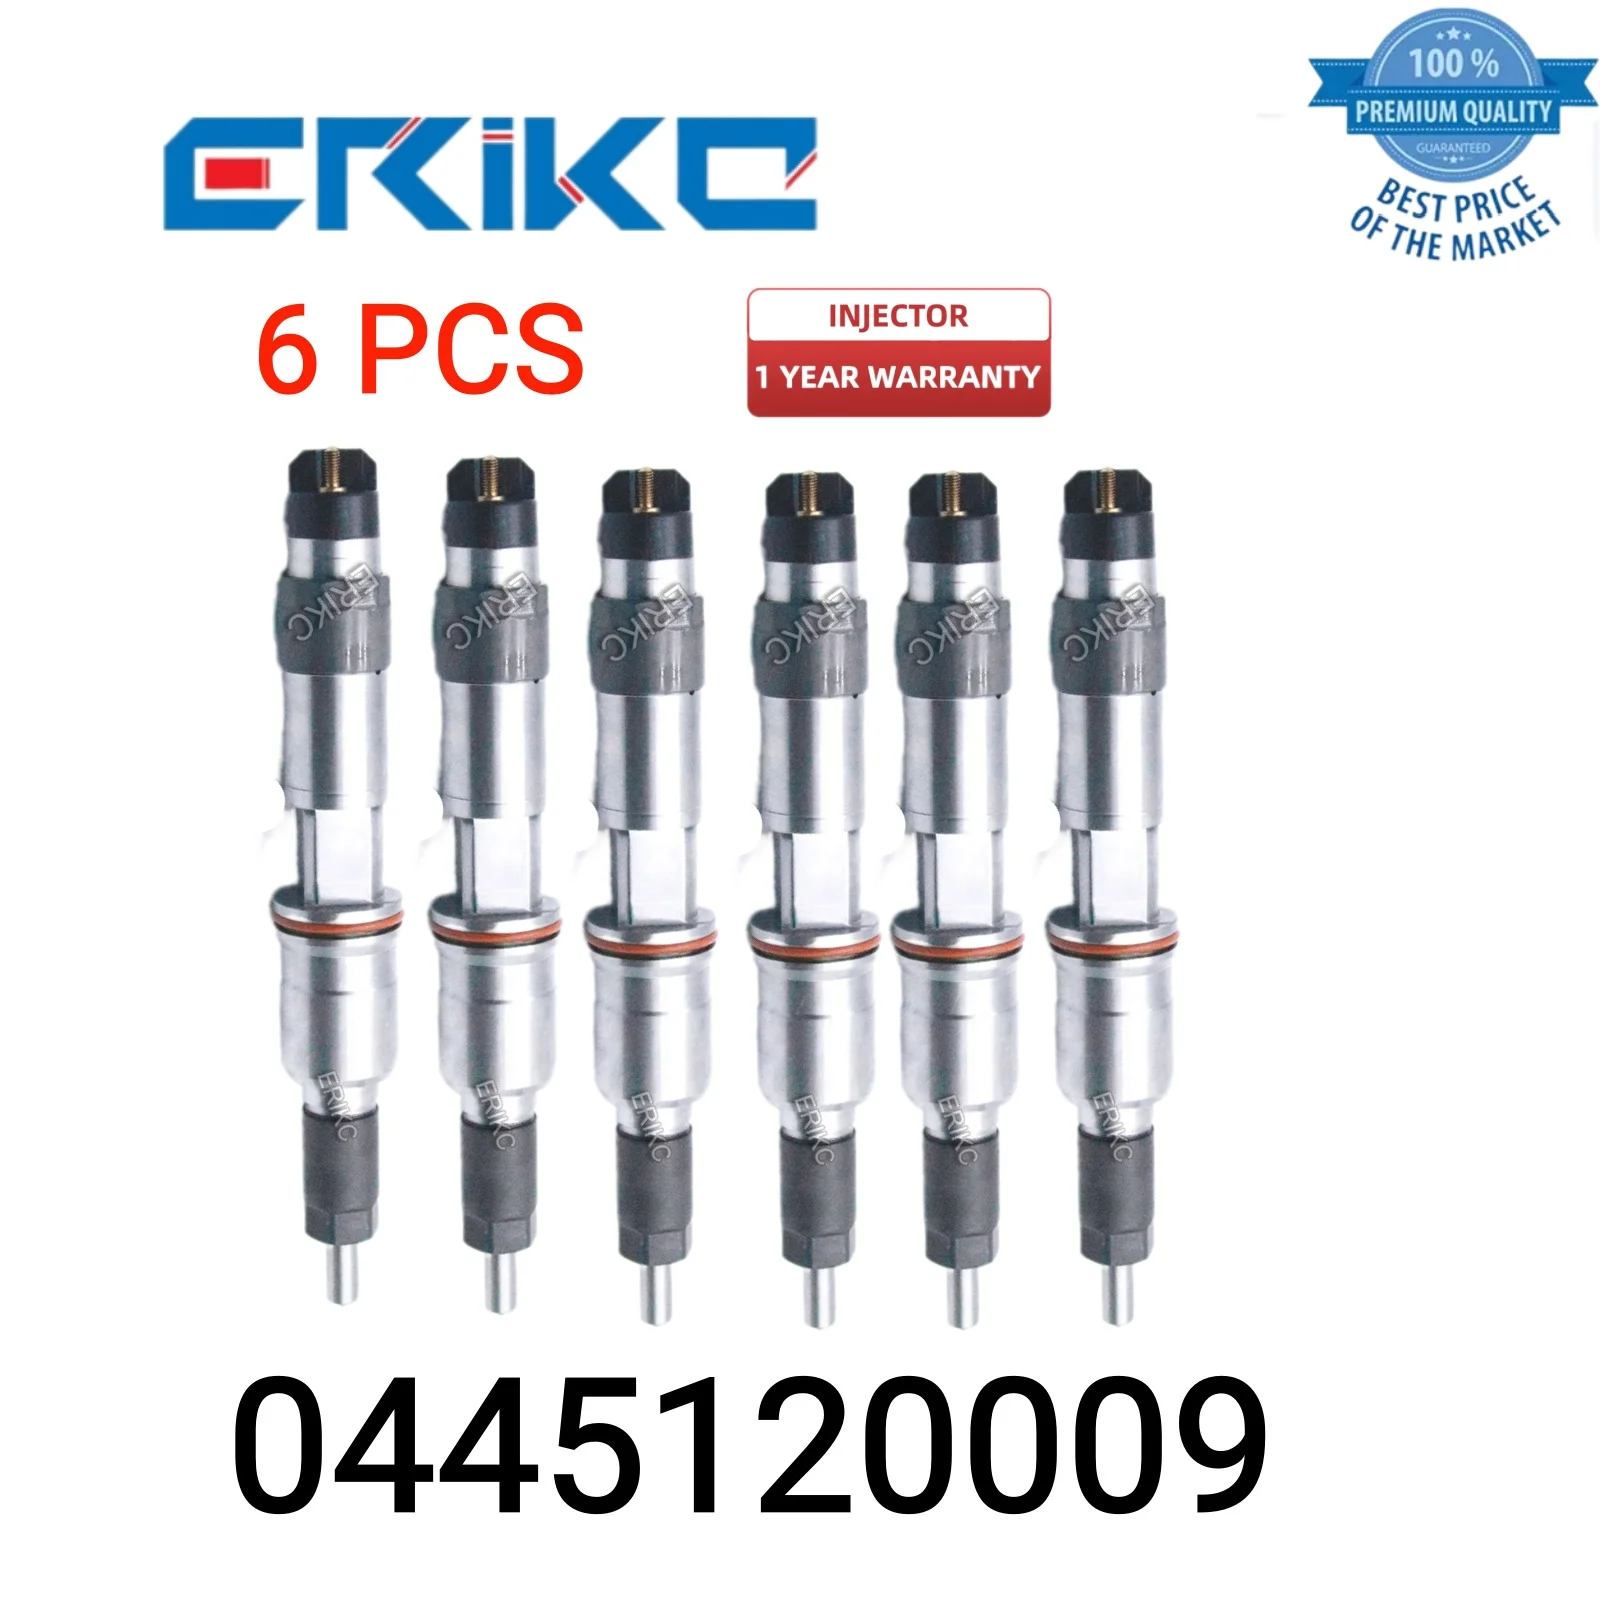 

6 PCS 0445120009 Nozzle Injector 0 445 120 009 Auto Common Rail Injector 0445 120 009 Injector Diesel fit for Renault